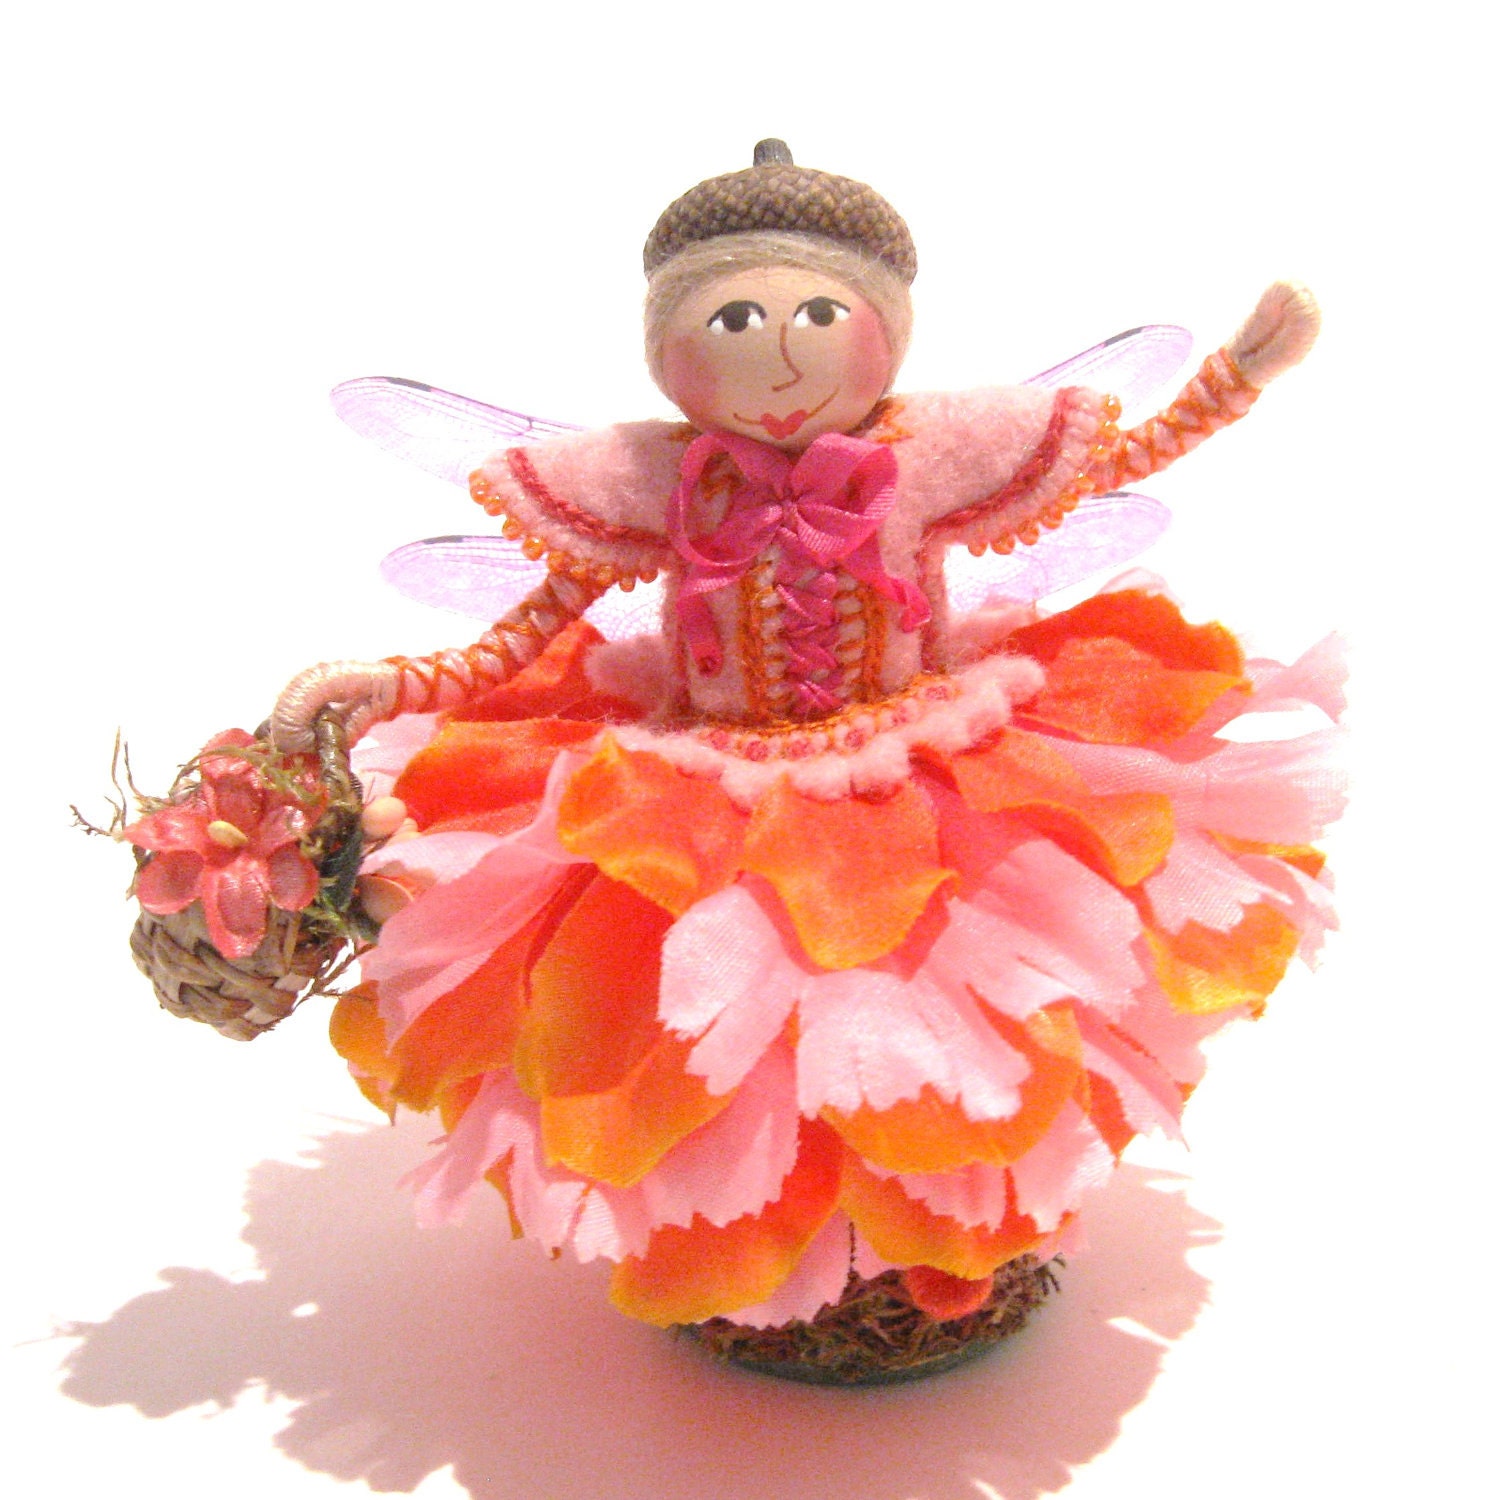 Flower Fairy Art Doll, Hand Embroidered